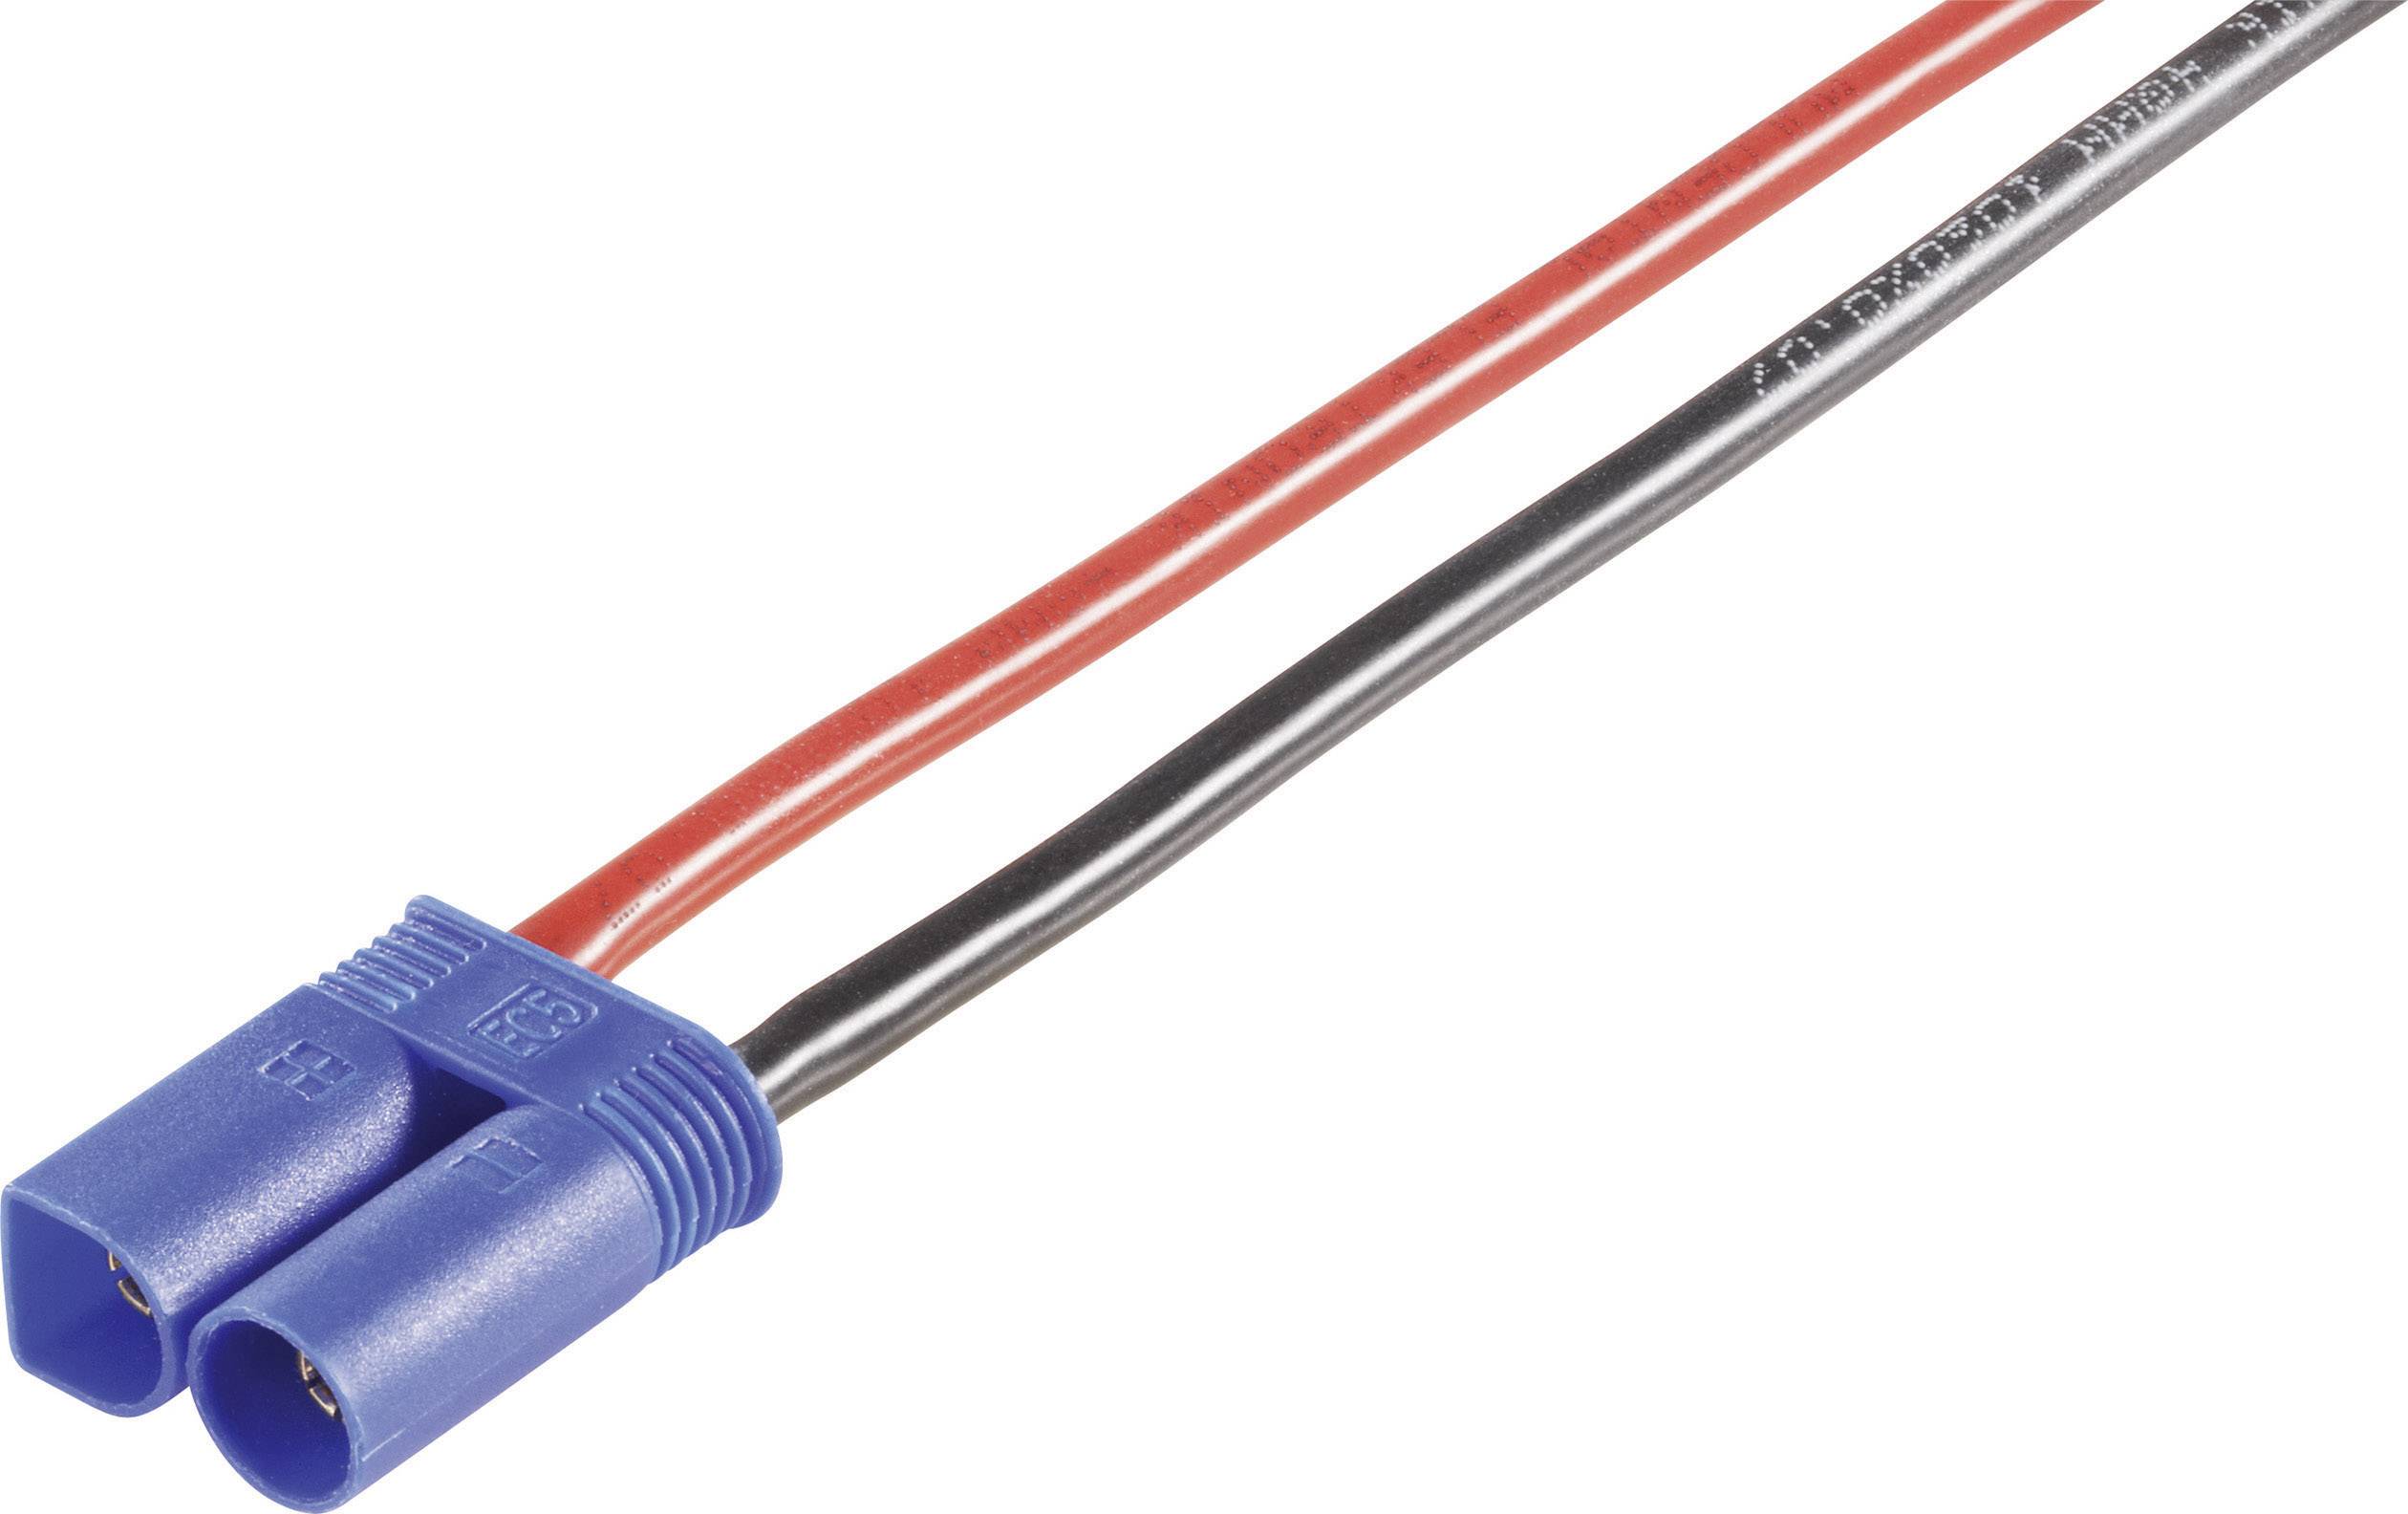 Battery cable. Cable1 126x0.4mm.